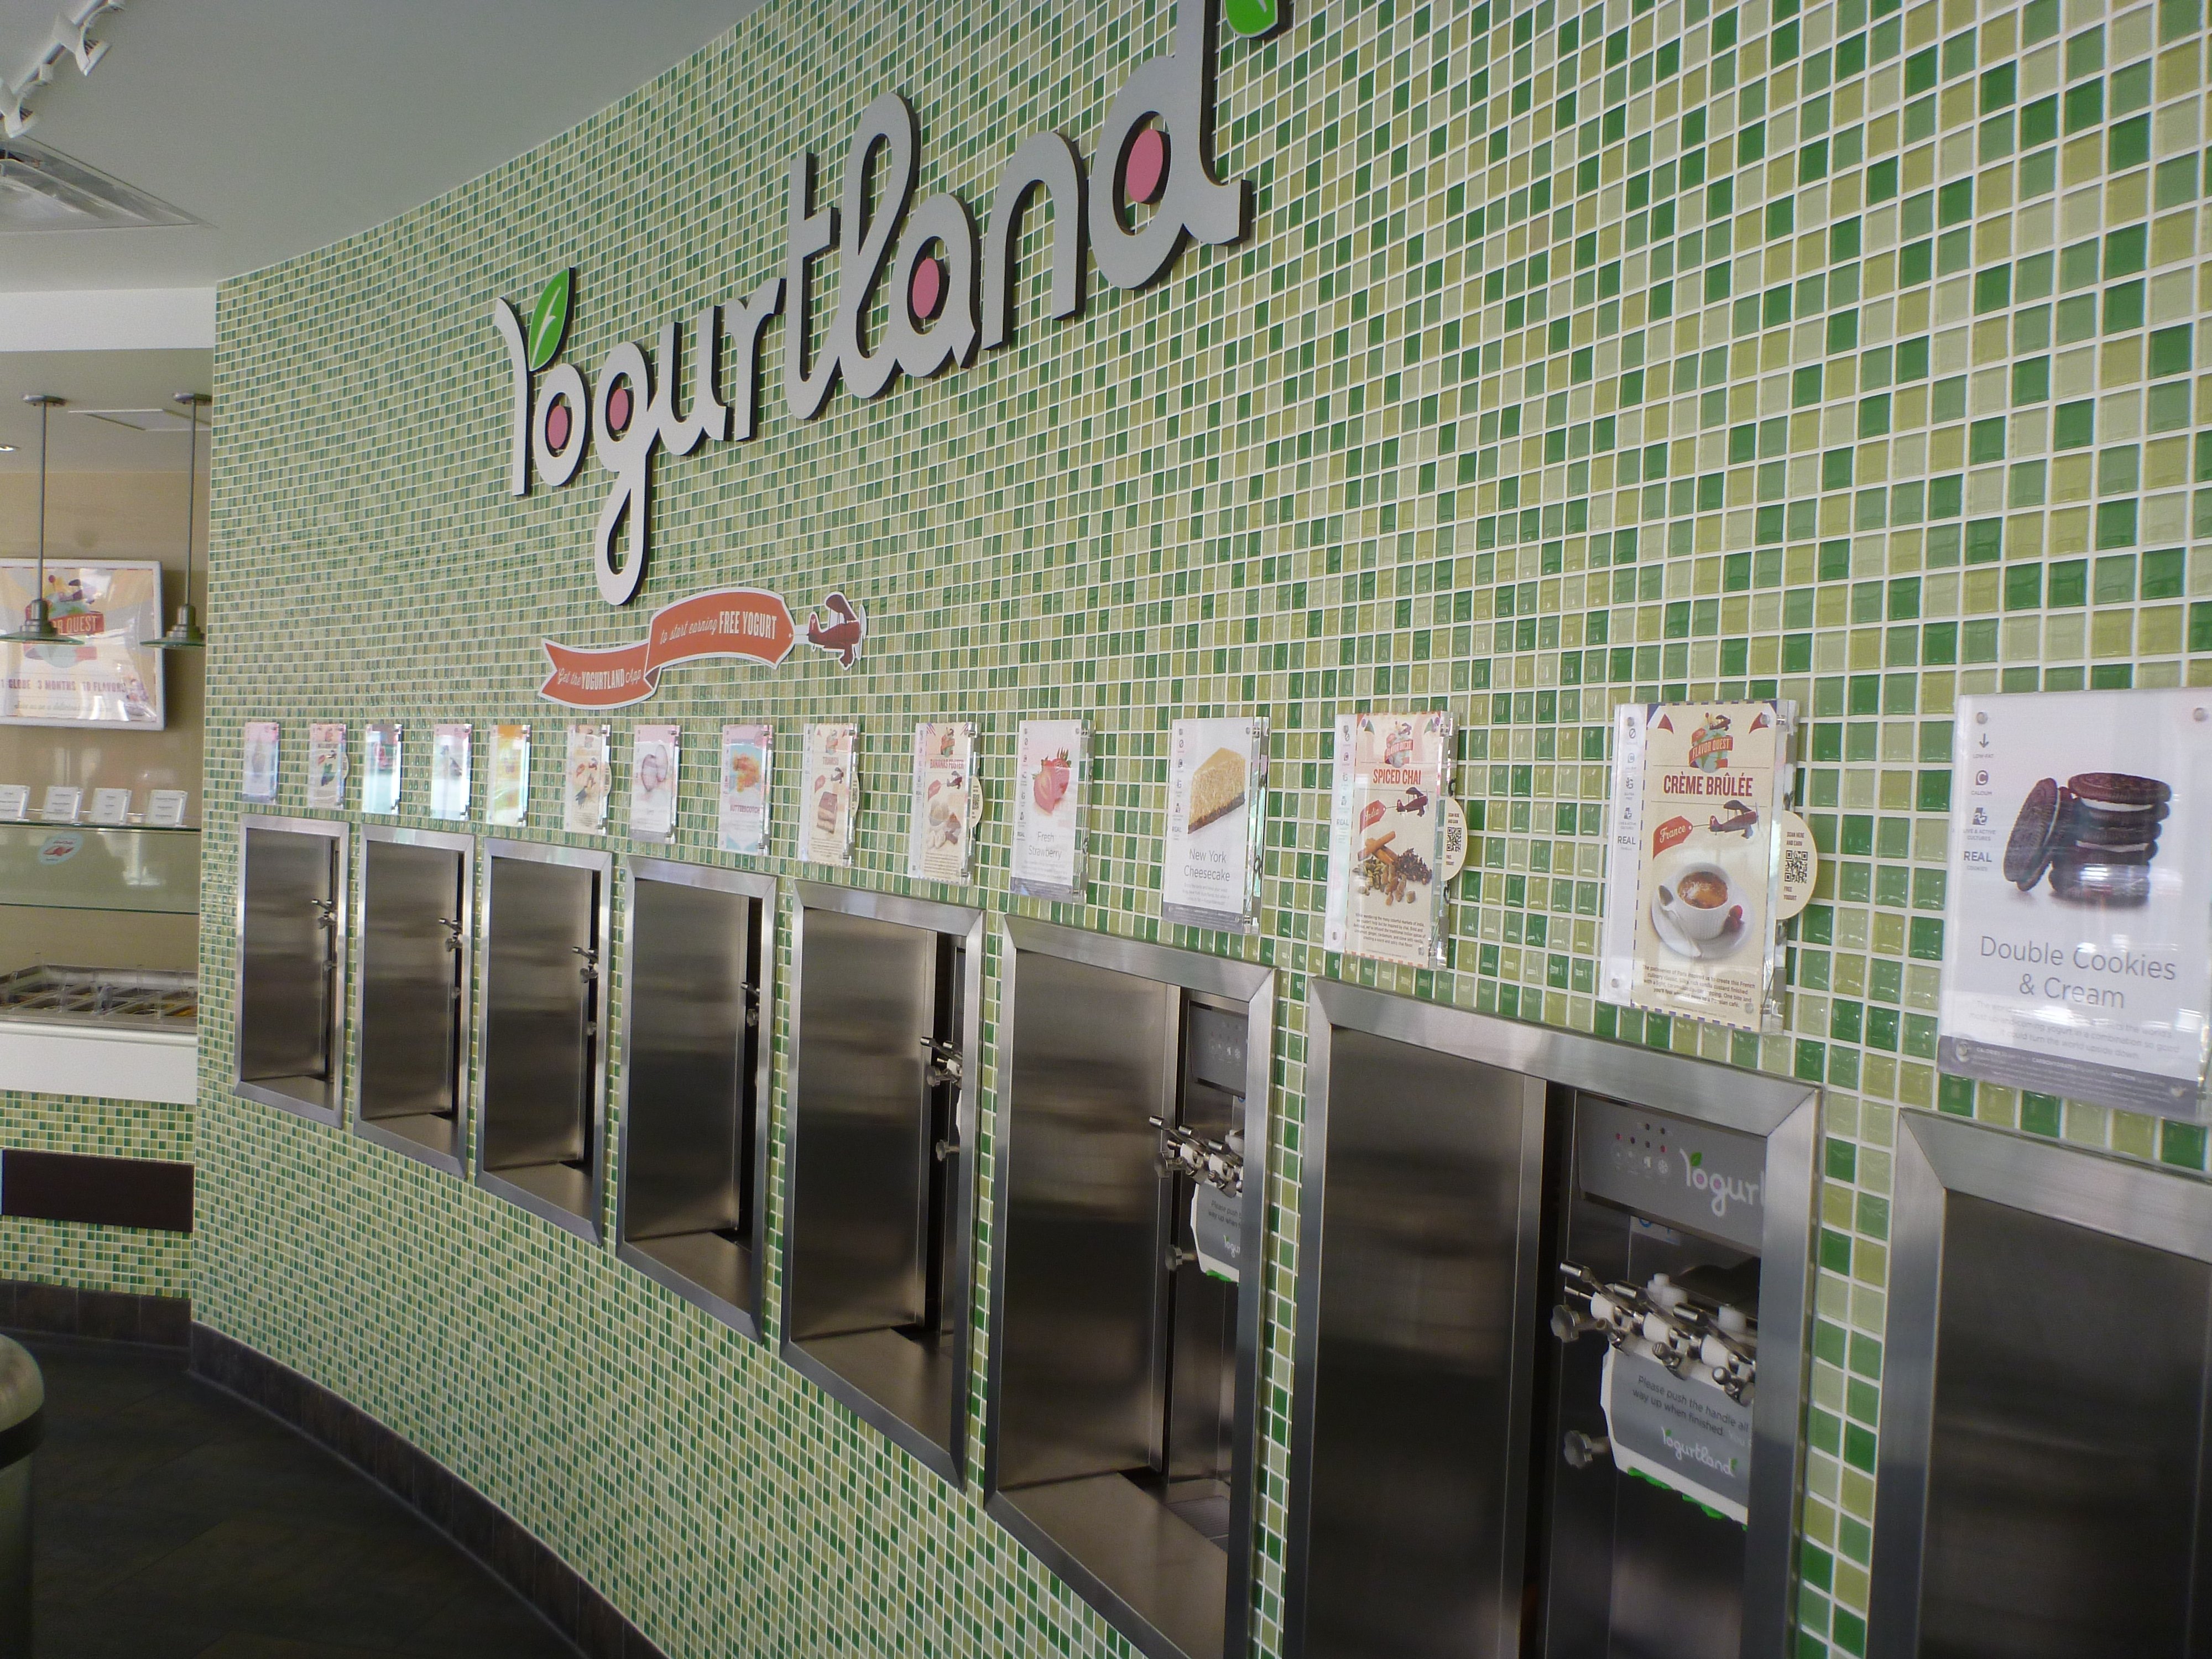 Yogurtland's appealing wall of flavors invites guests to create their own frozen treat.